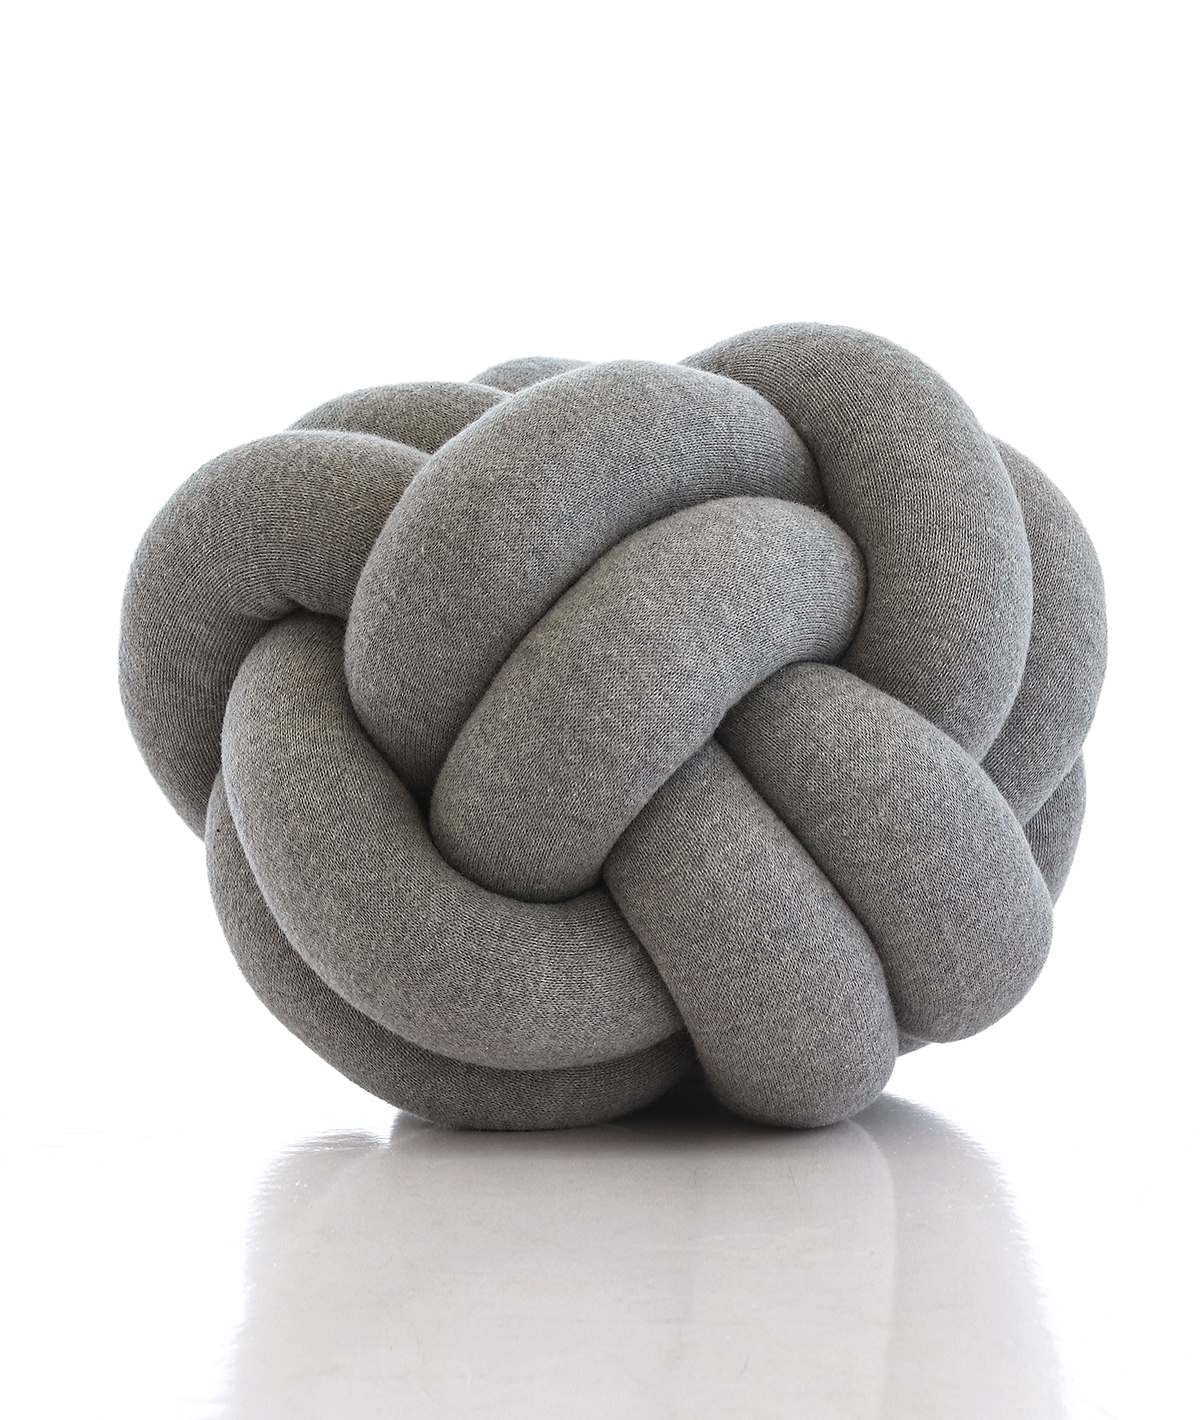 Knitted Knot Pillow